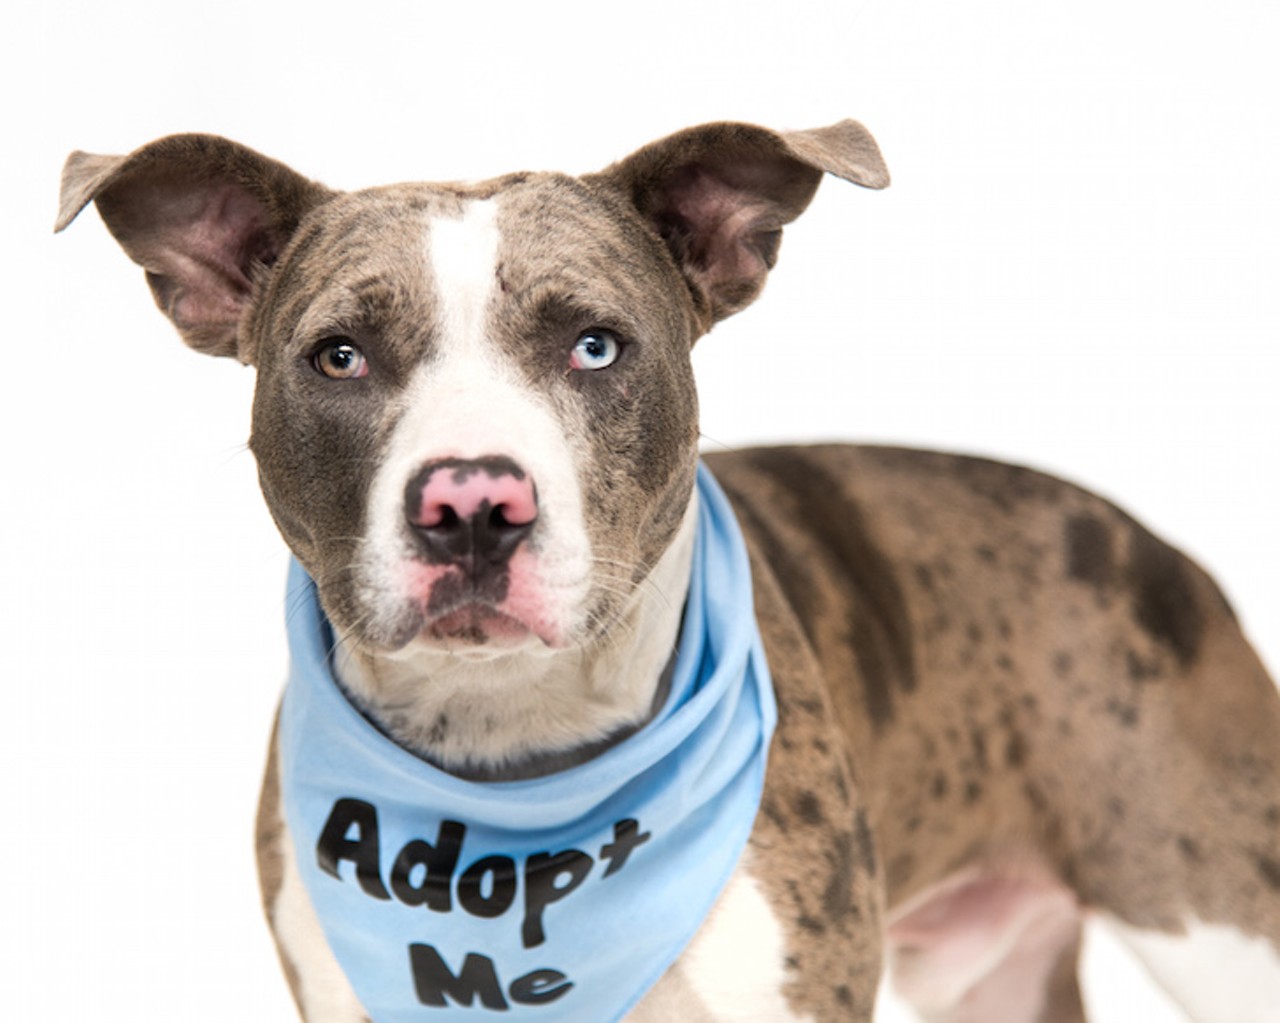 24 adoptable dogs looking for a serious relationship